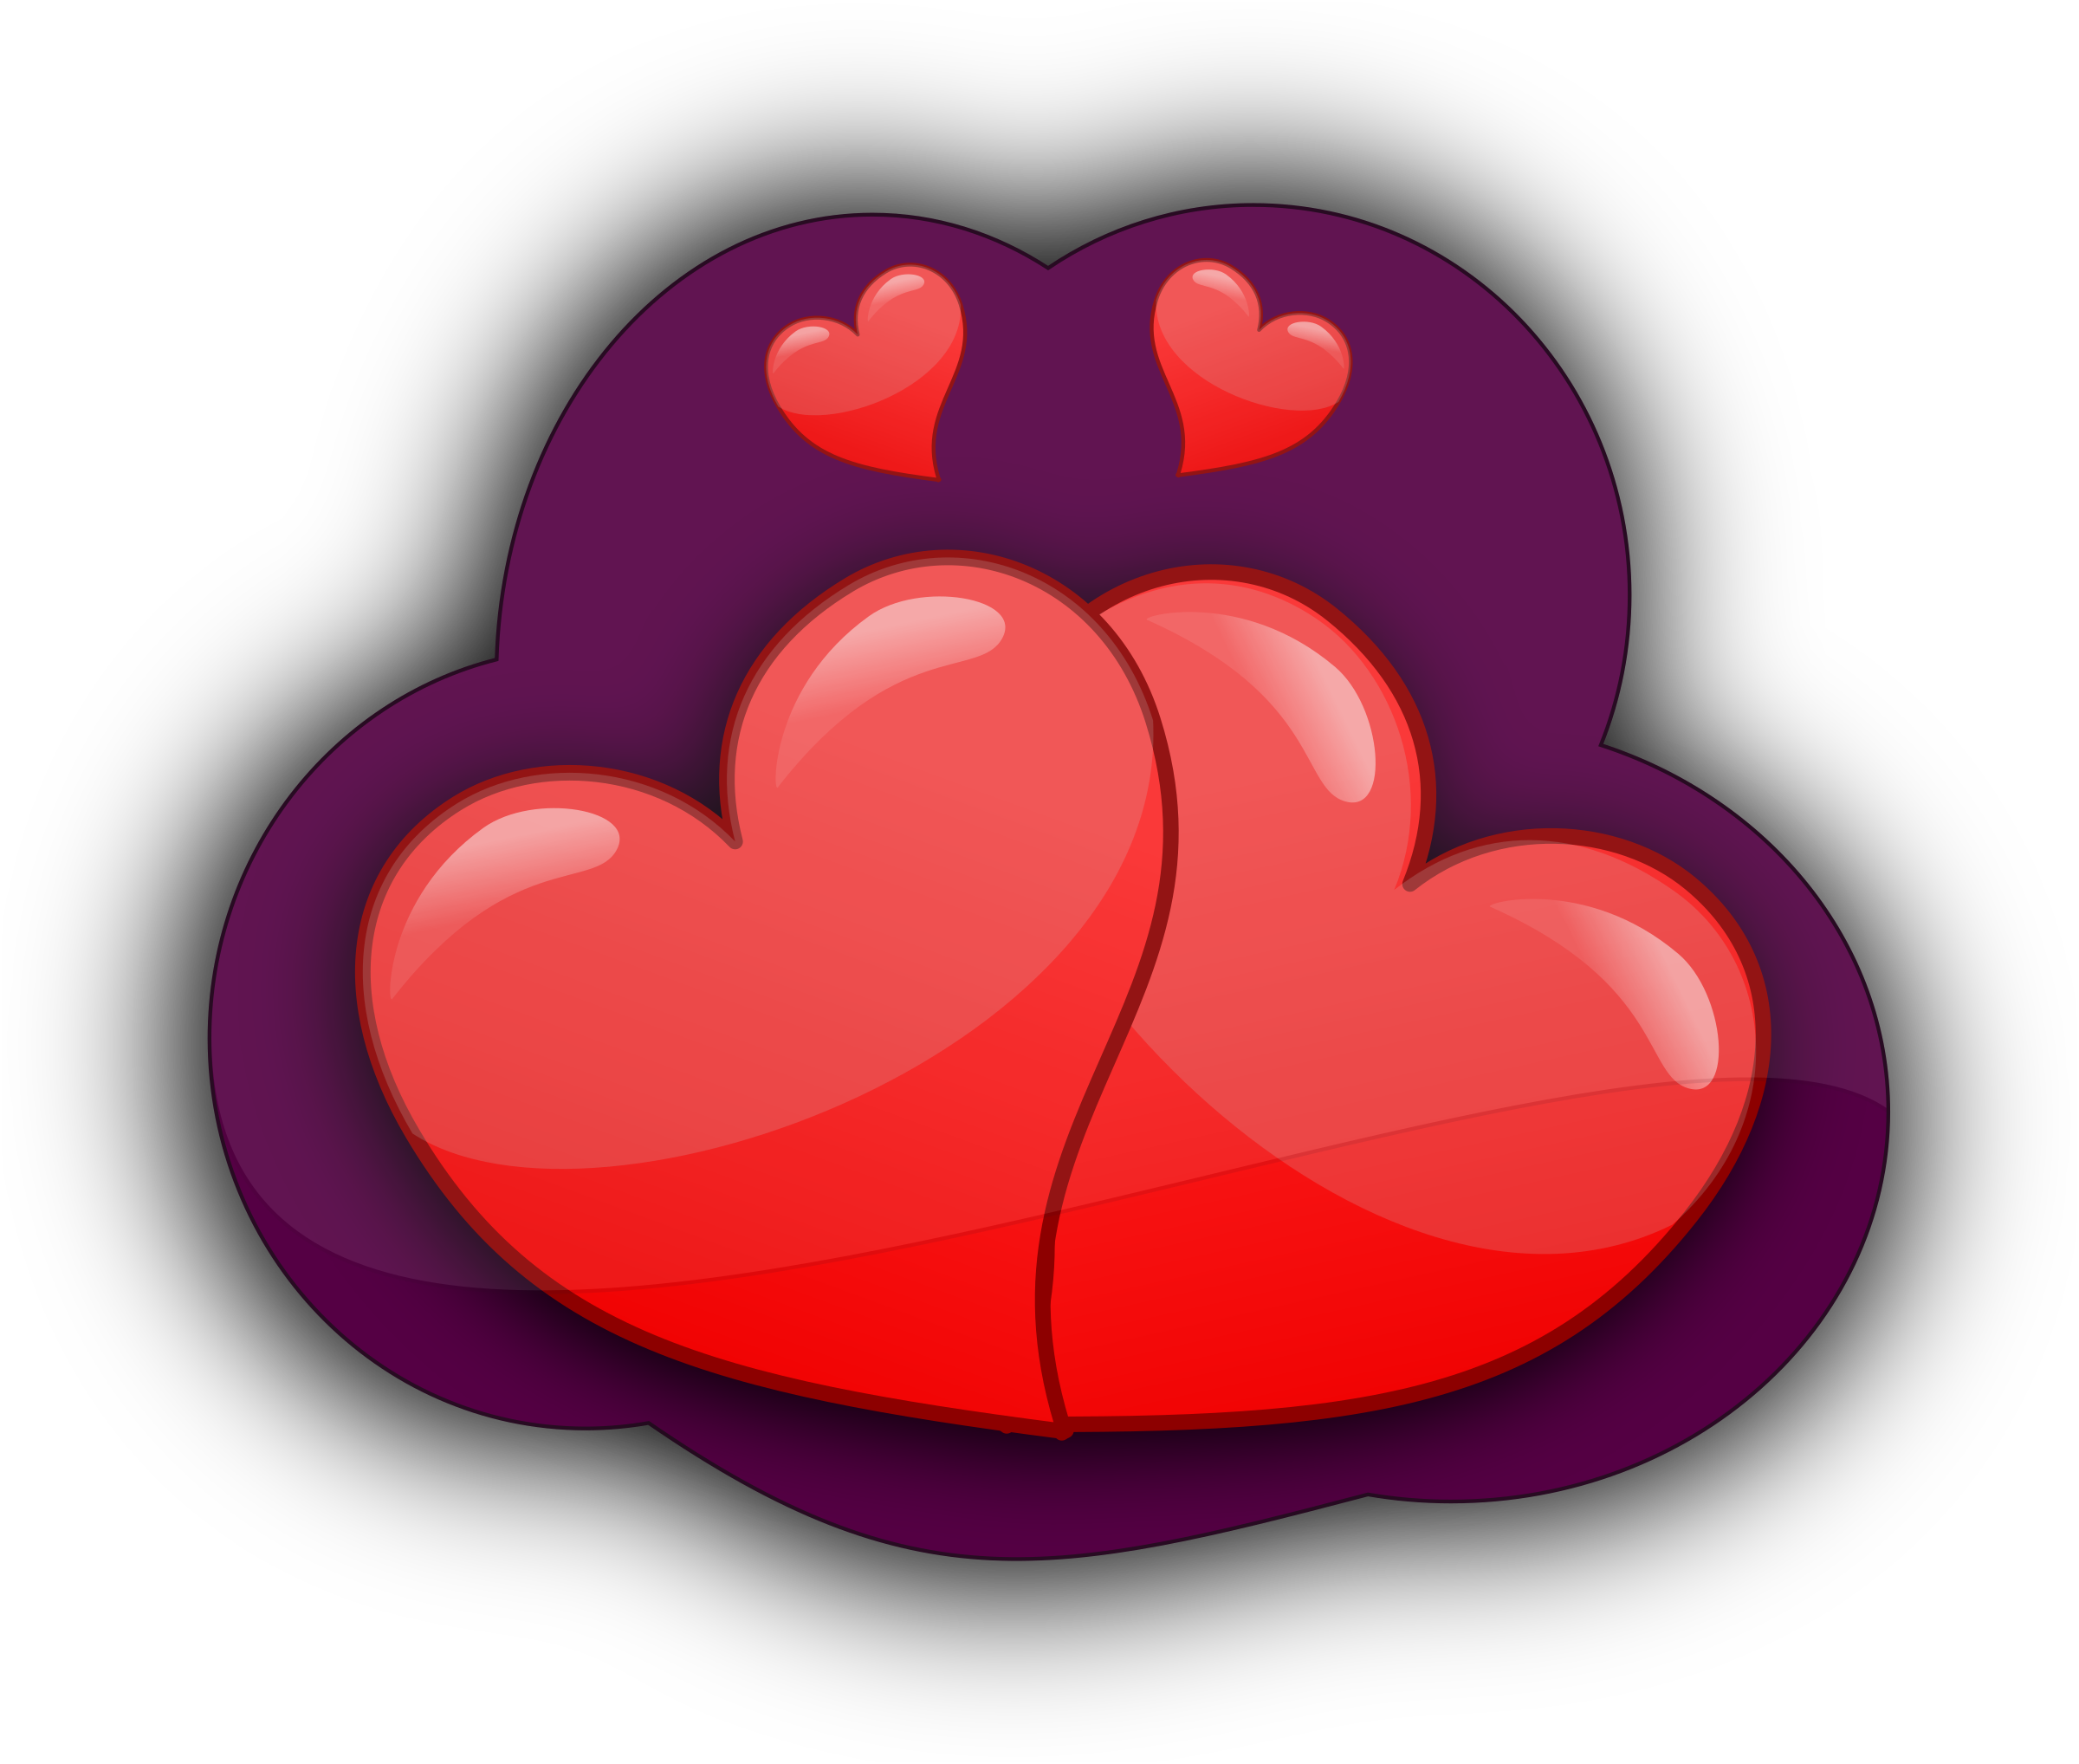 Loving hearts big image. Nice clipart loved